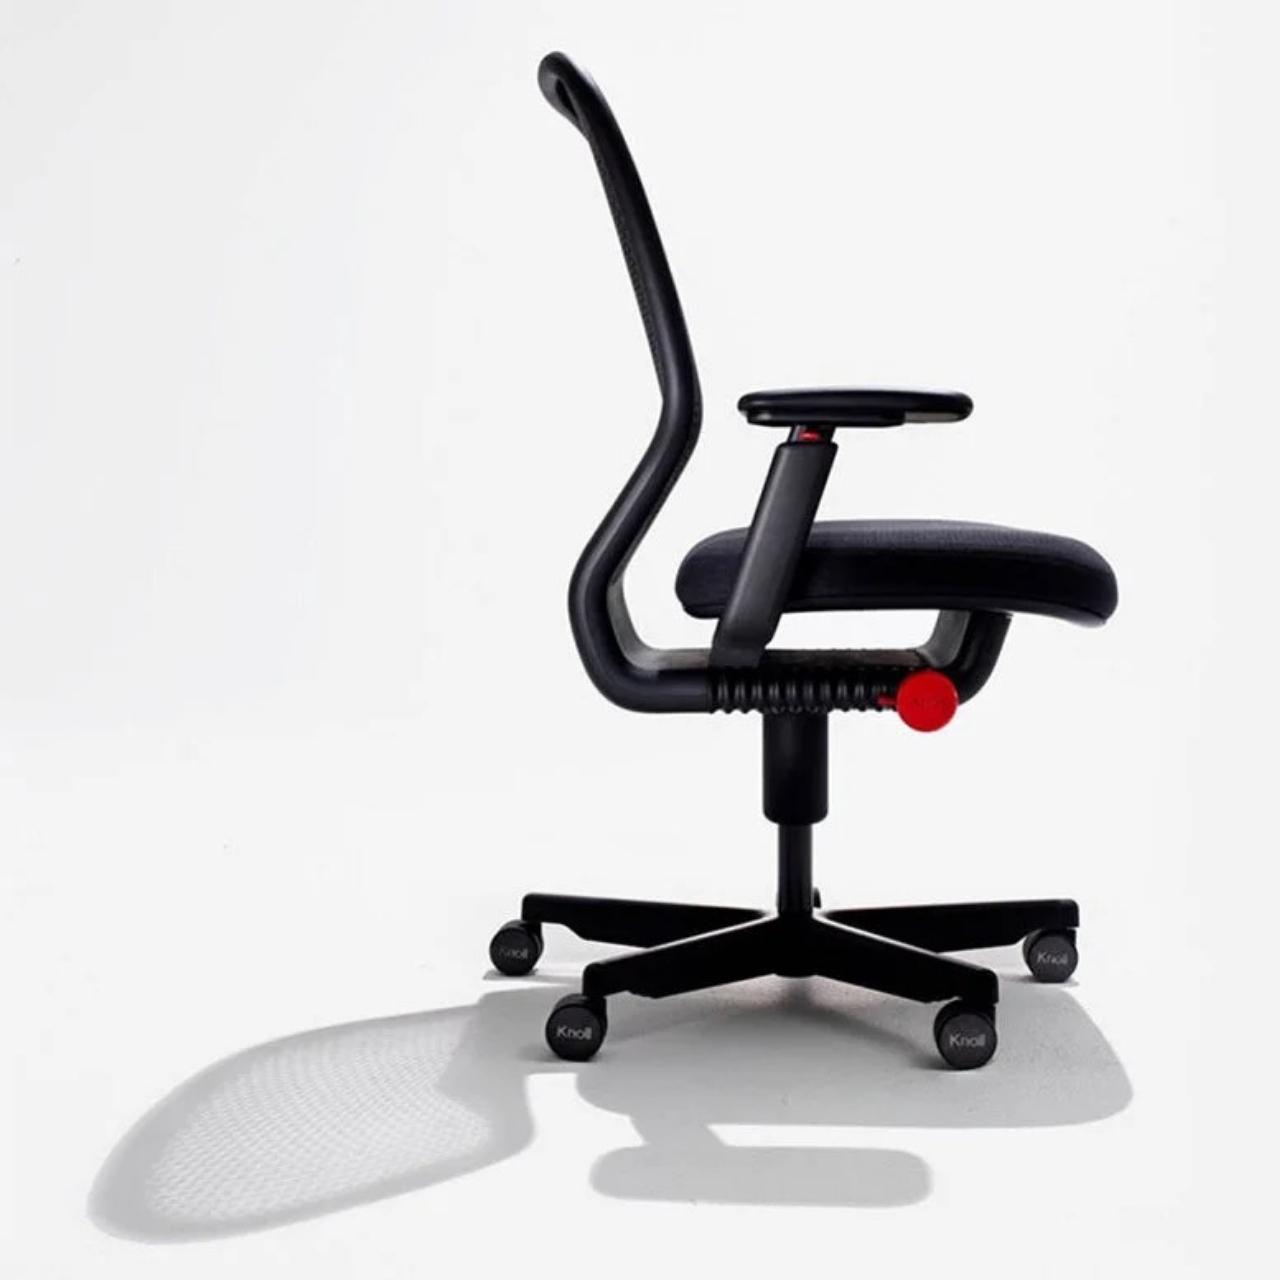 Ergonomic seat cushion is a doctor-designed lifeline for your lower back -  Yanko Design